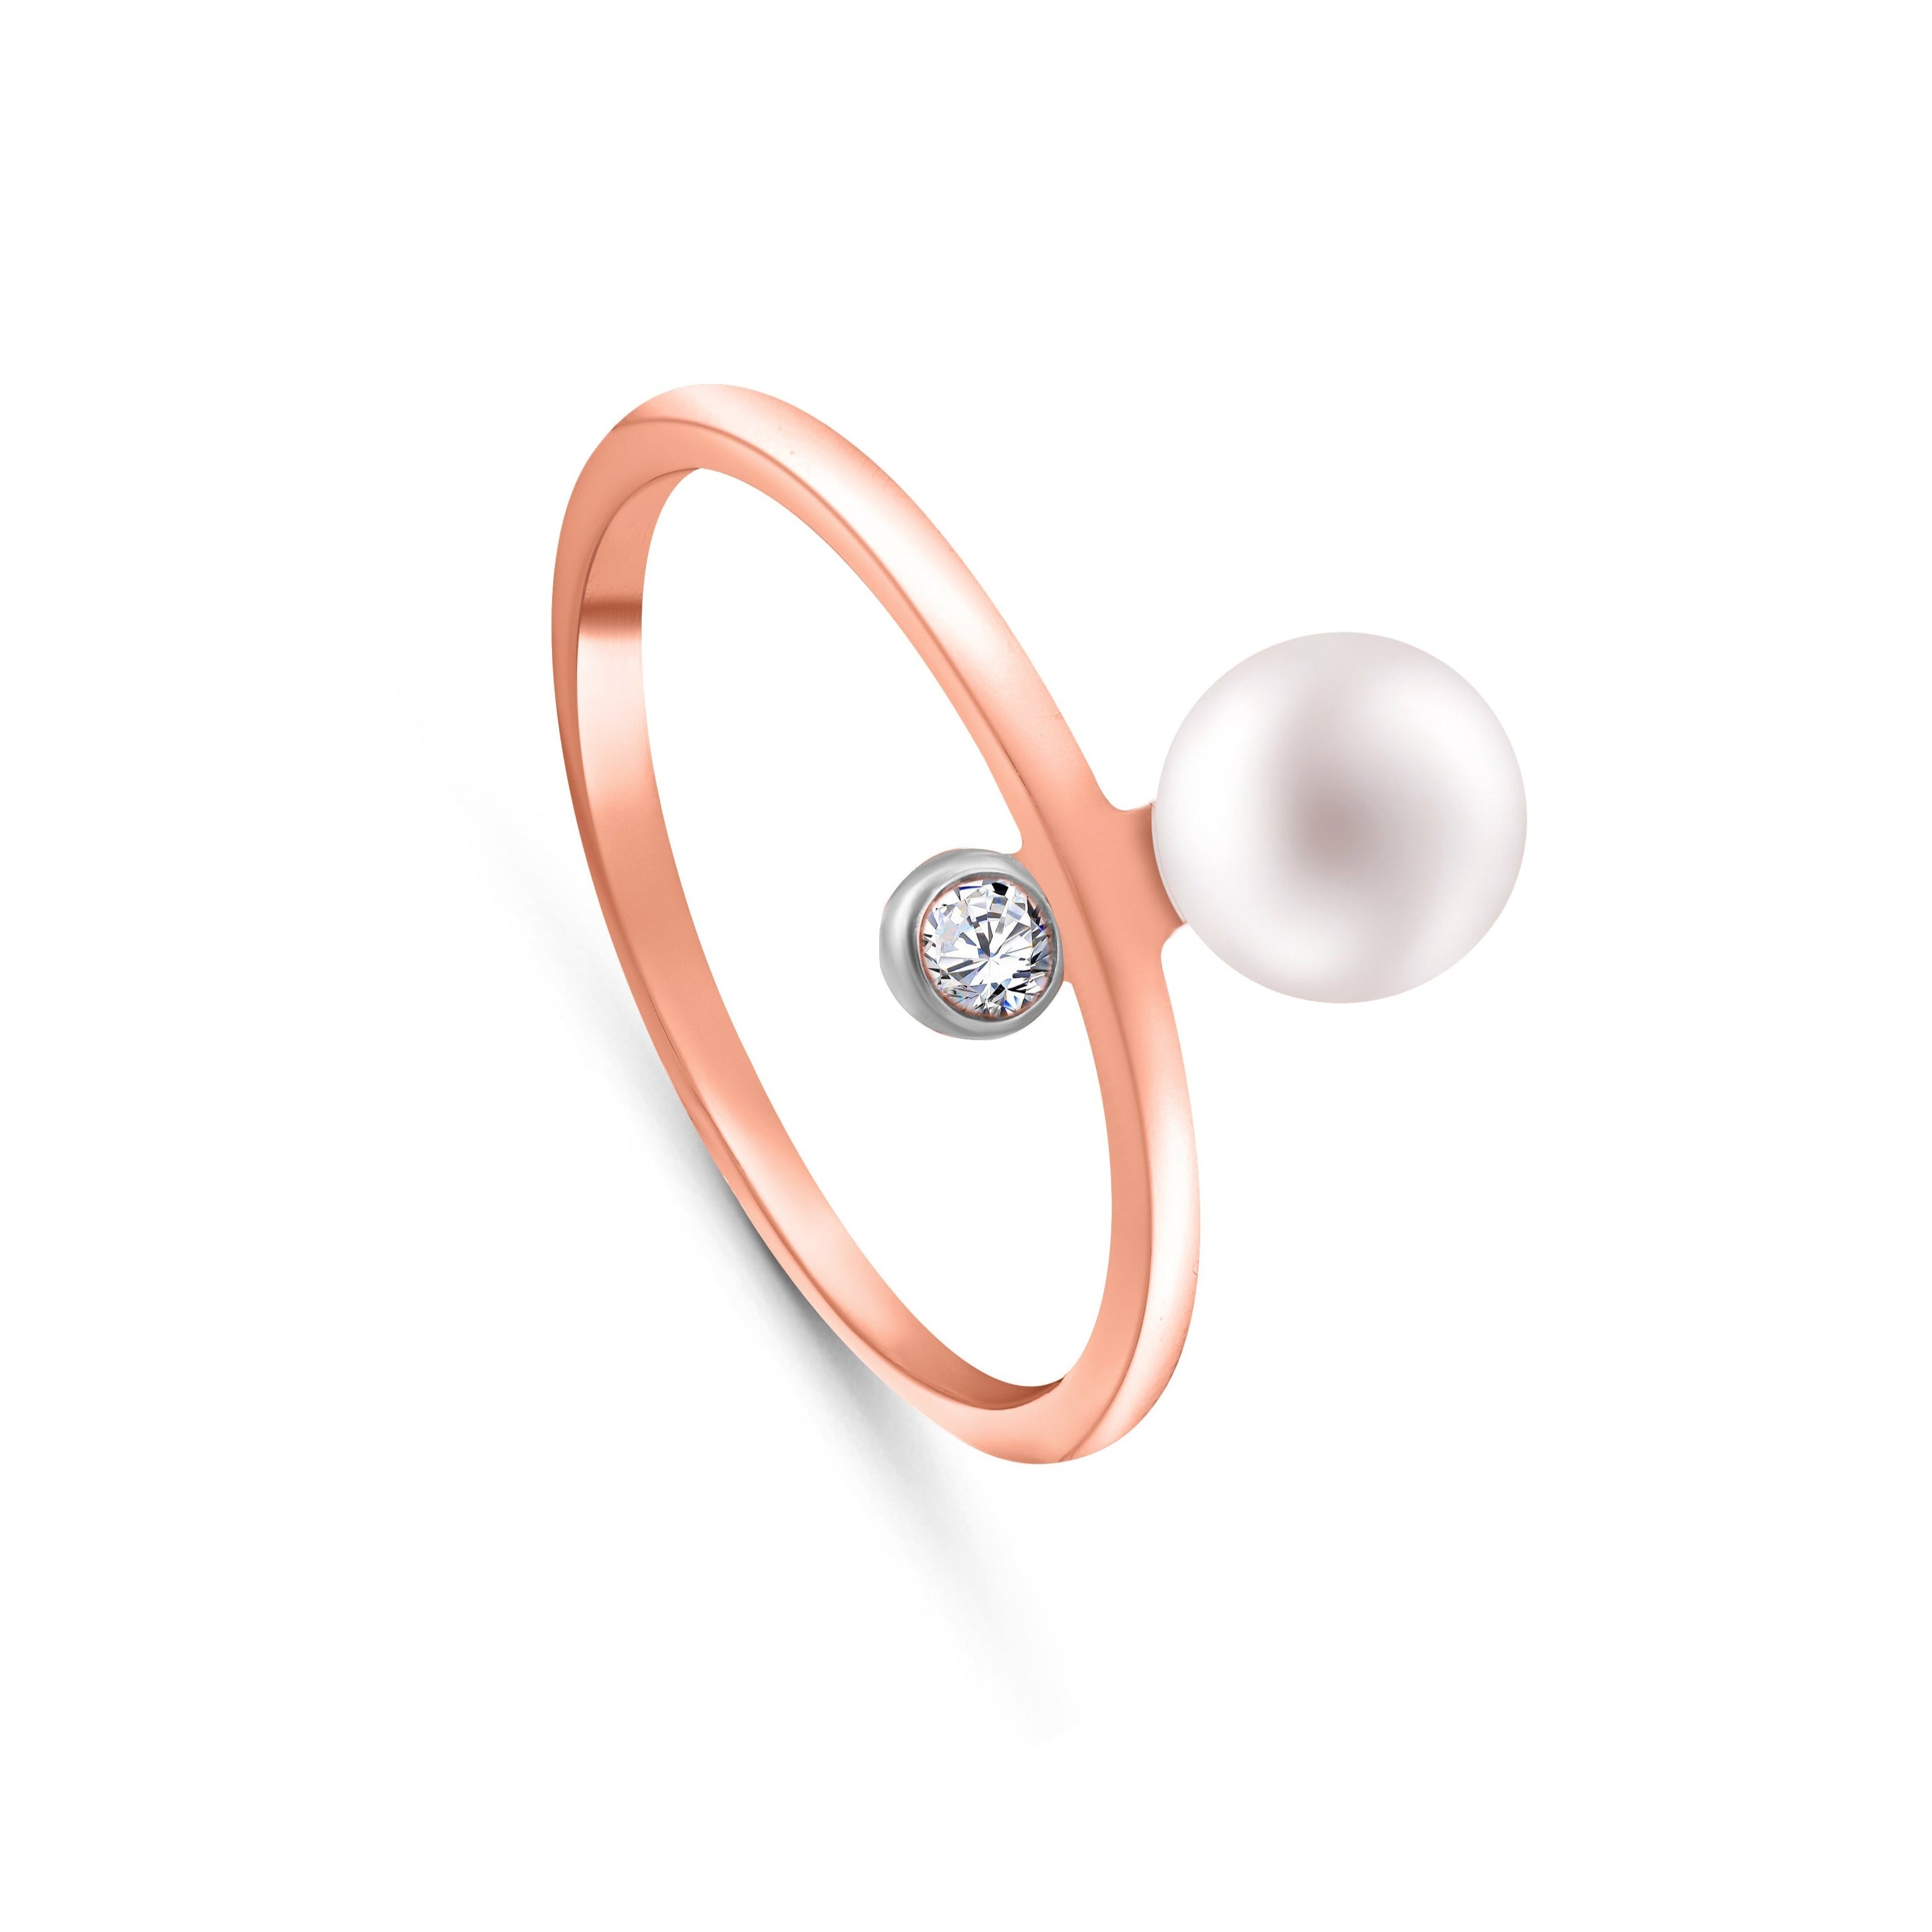 A beautiful ring with 1 round brilliant diamond and 1 pearl on center in 18K Rose Gold - S-X20R